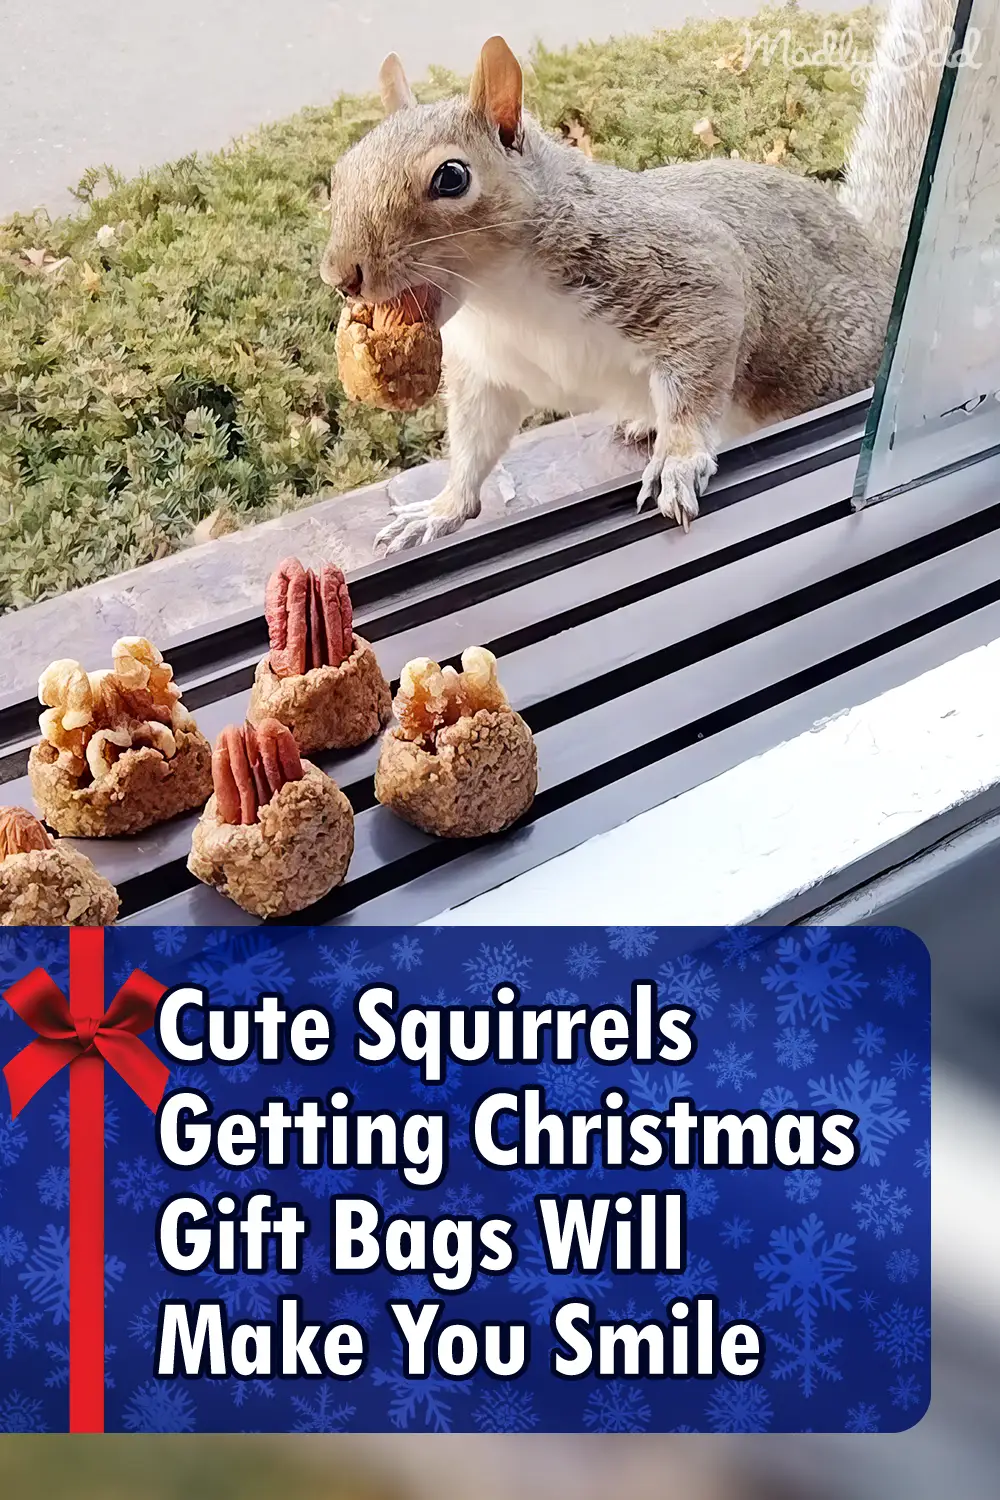 Cute Squirrels Getting Christmas Gift Bags Will Make You Smile